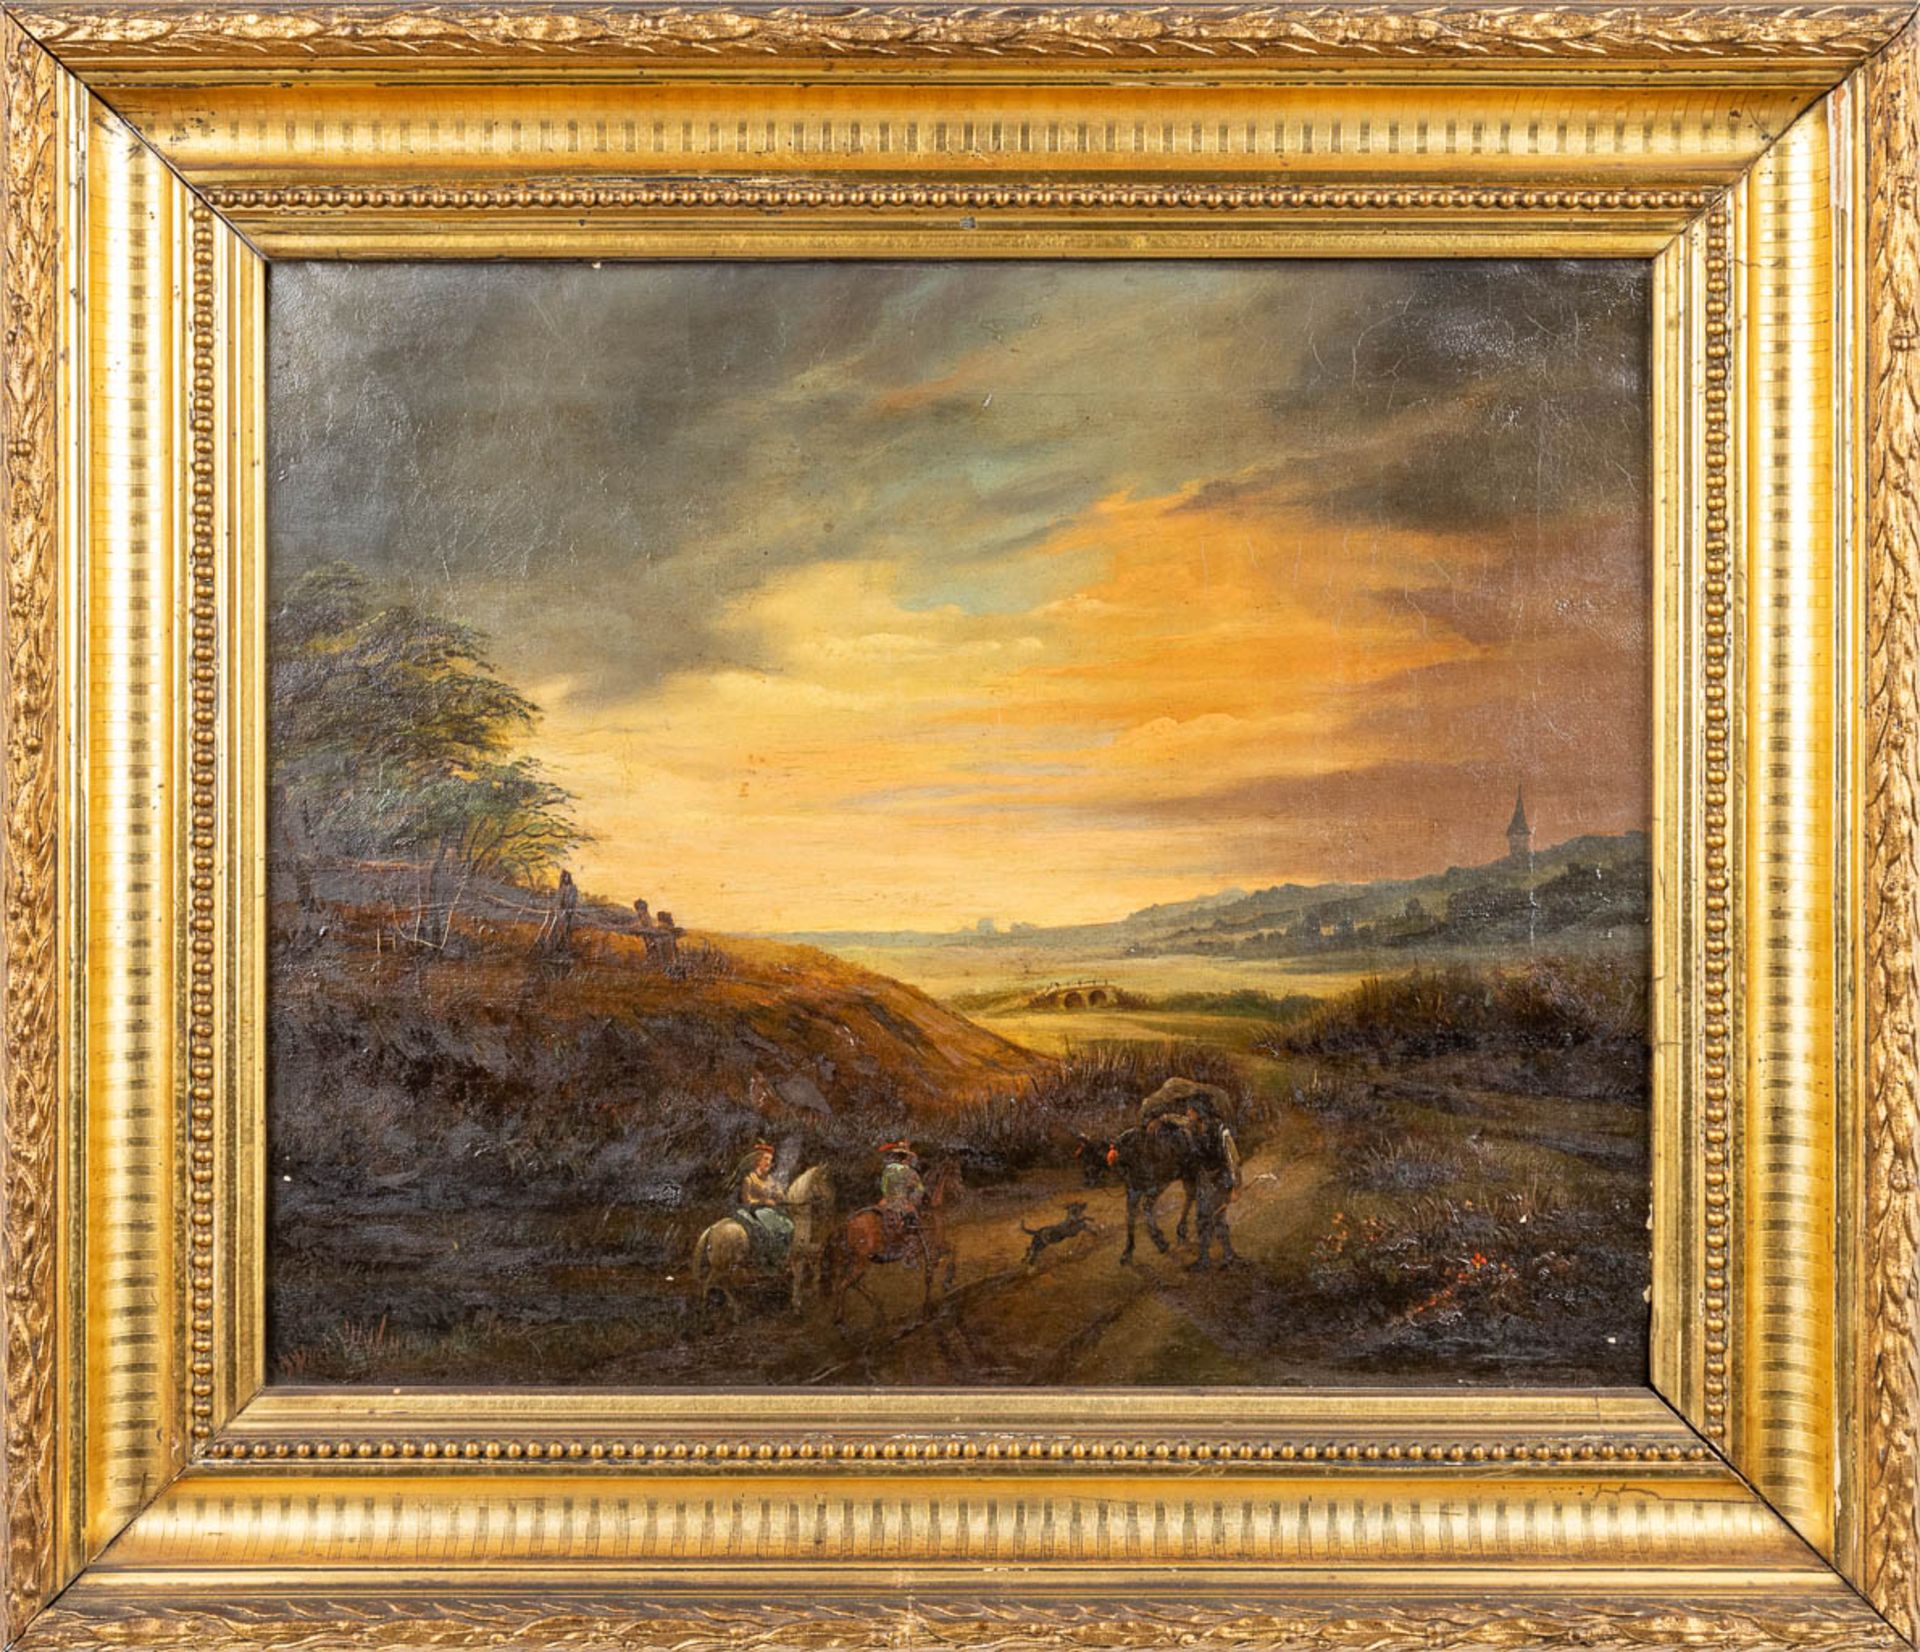 'Landscape at dusk', a painting, oil on canvas. No signature found (50 x 41cm) - Image 4 of 8